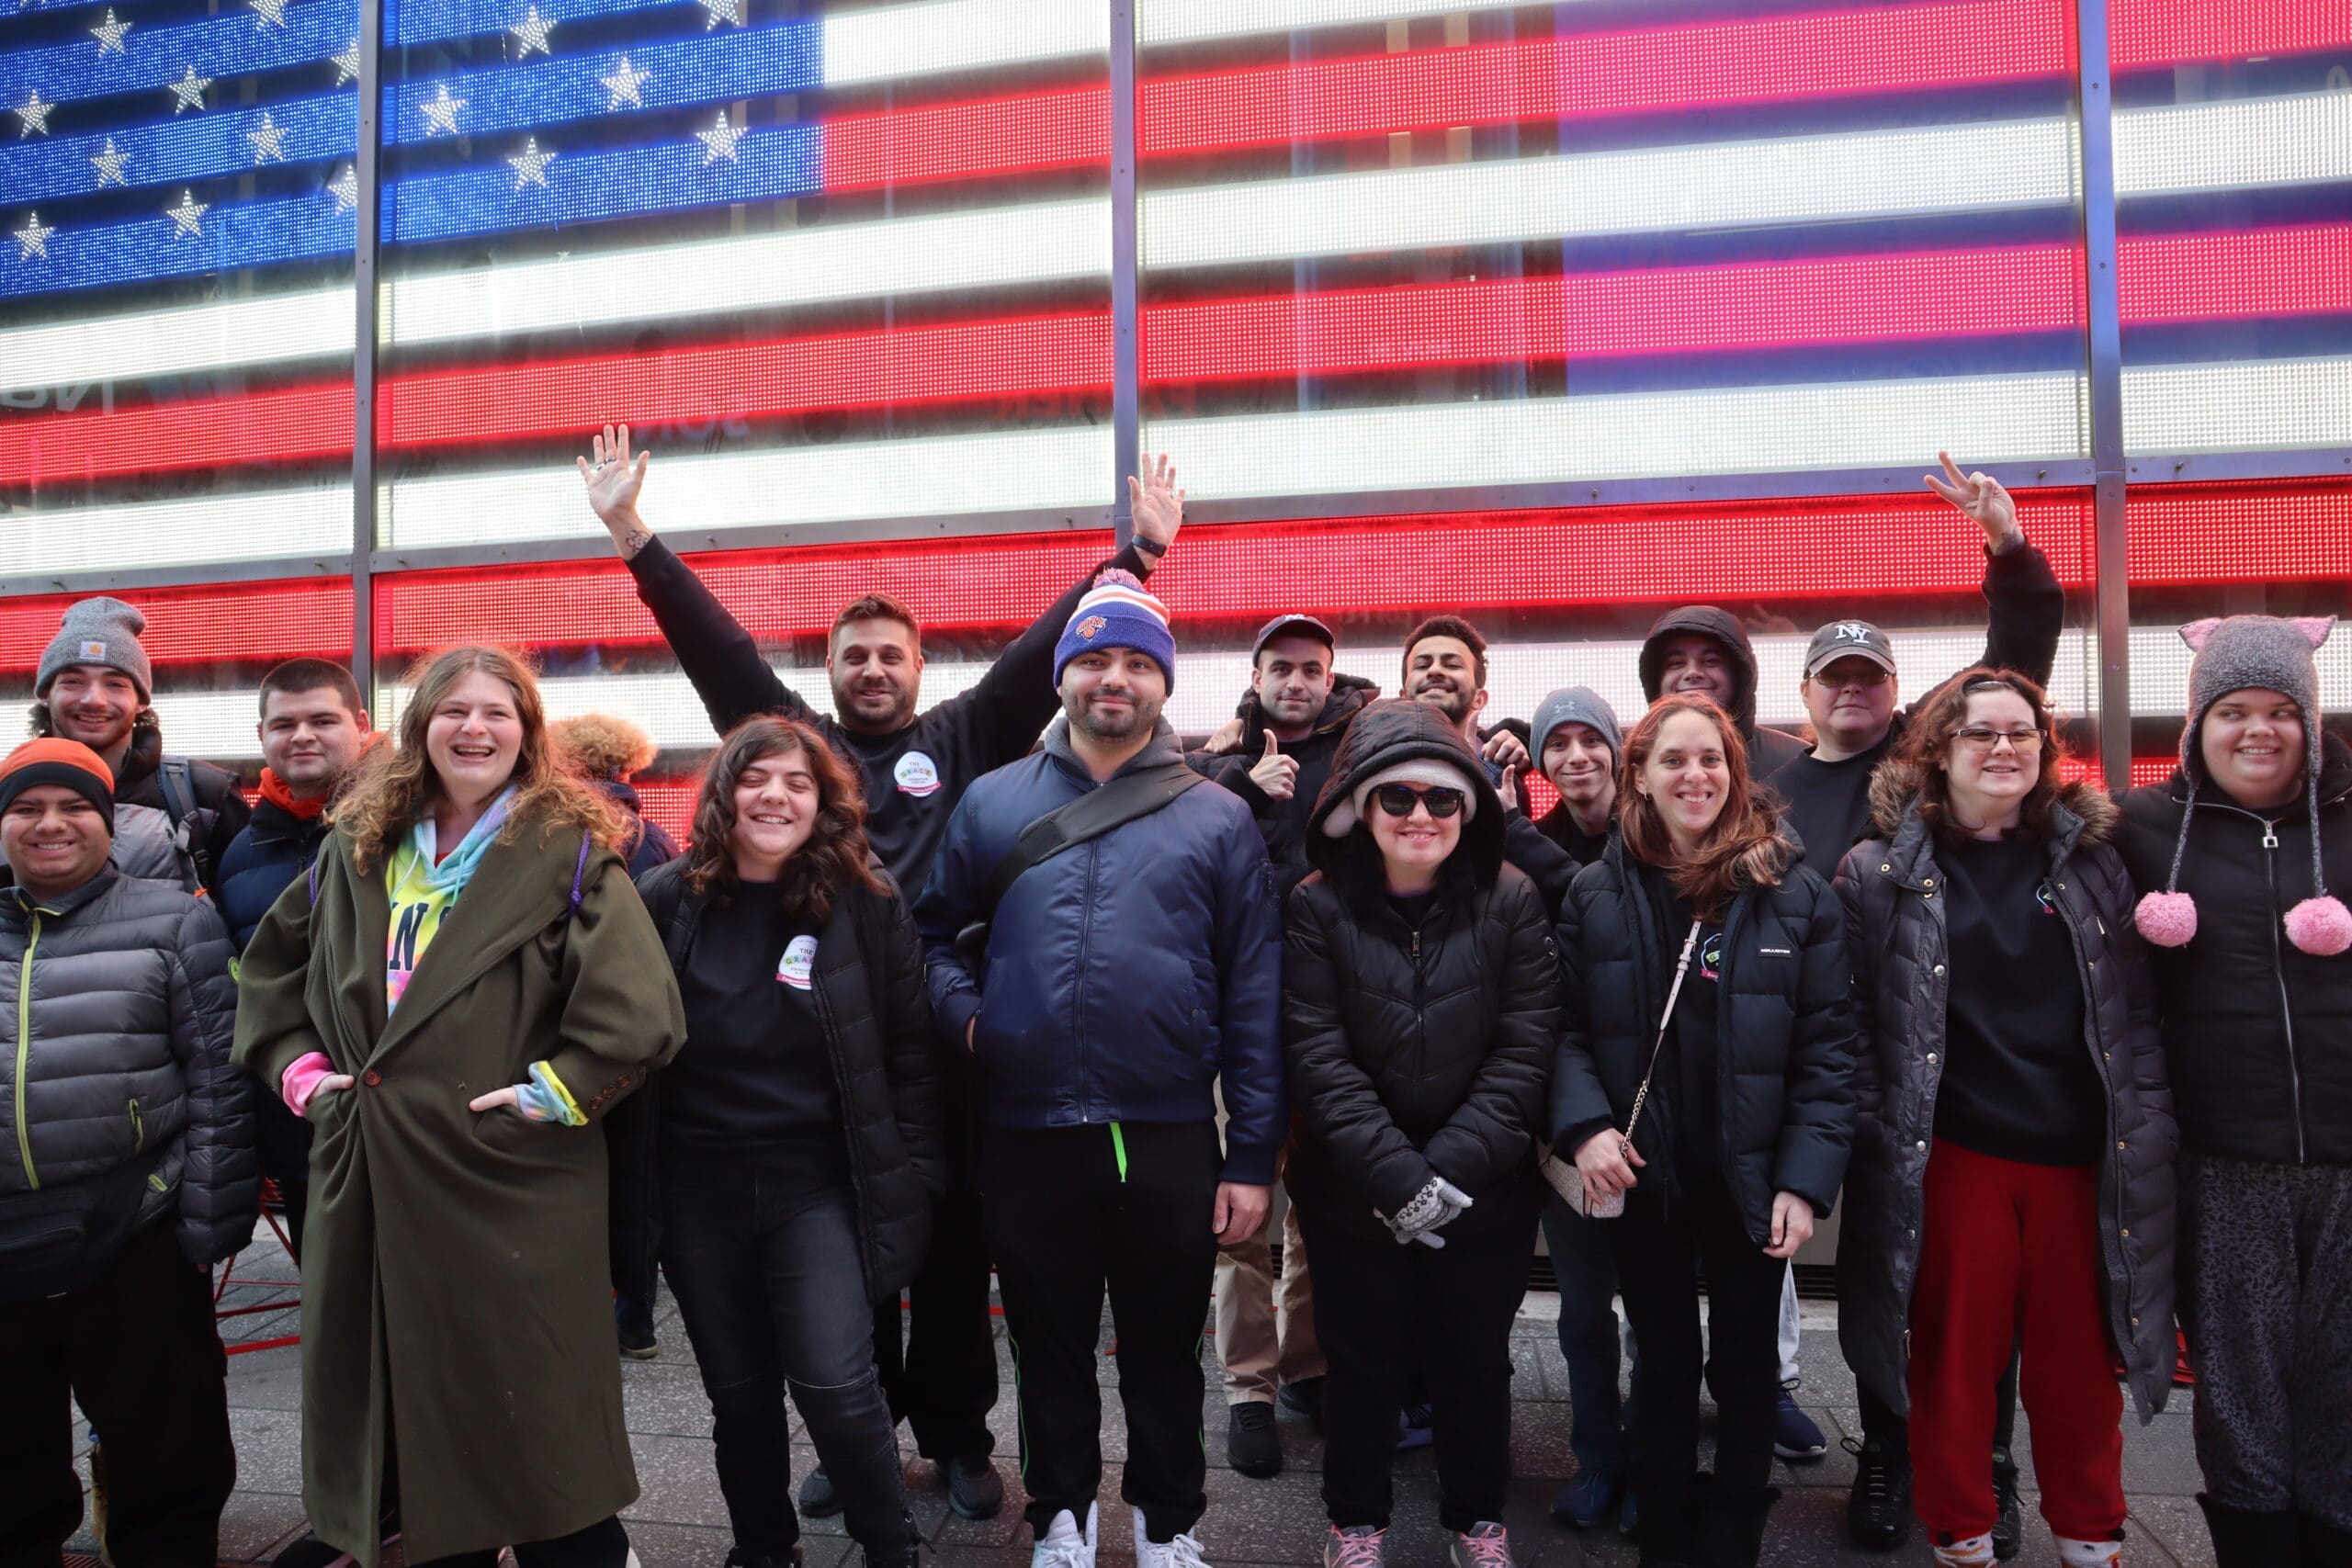 Group of people from The GRACE Foundation smiling and waving in front of an American flag backdrop.